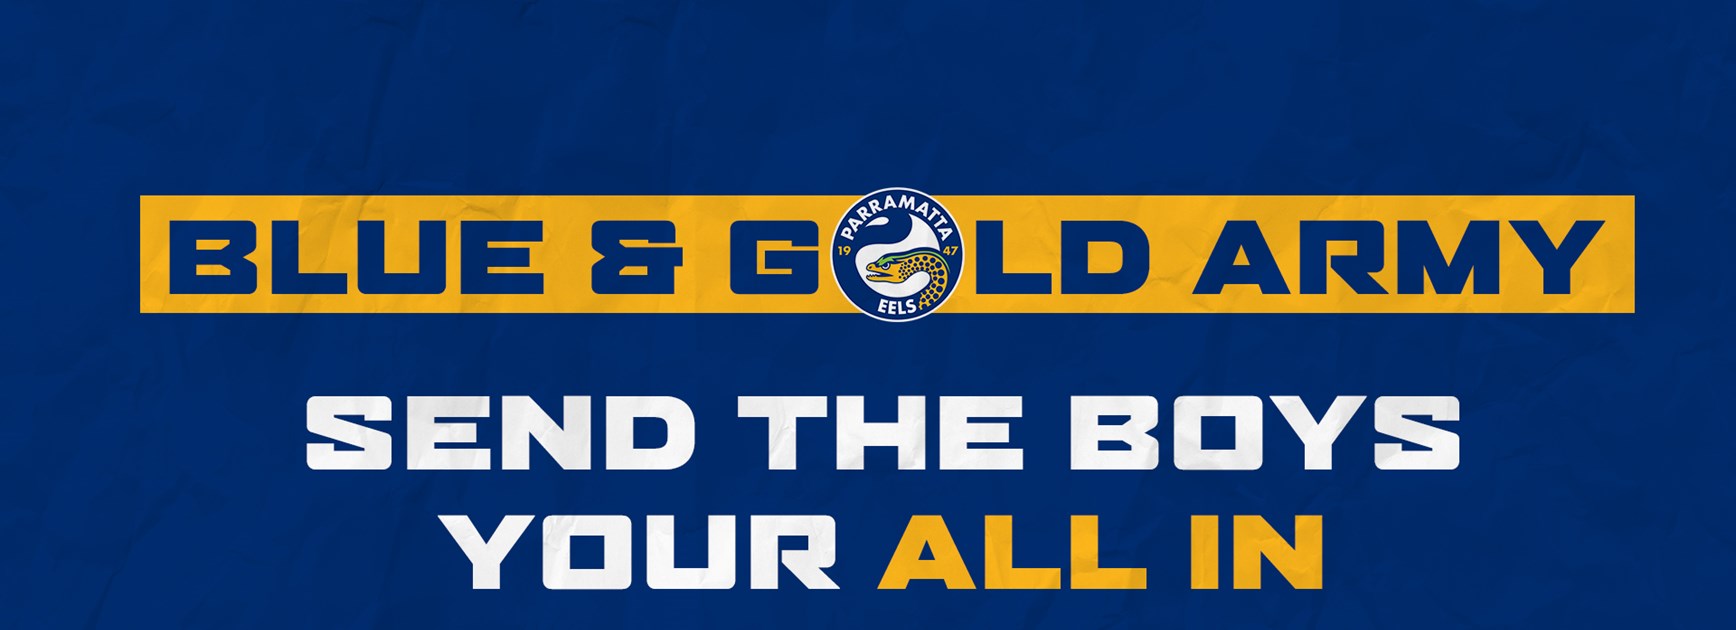 Blue and Gold Army, we need your support!